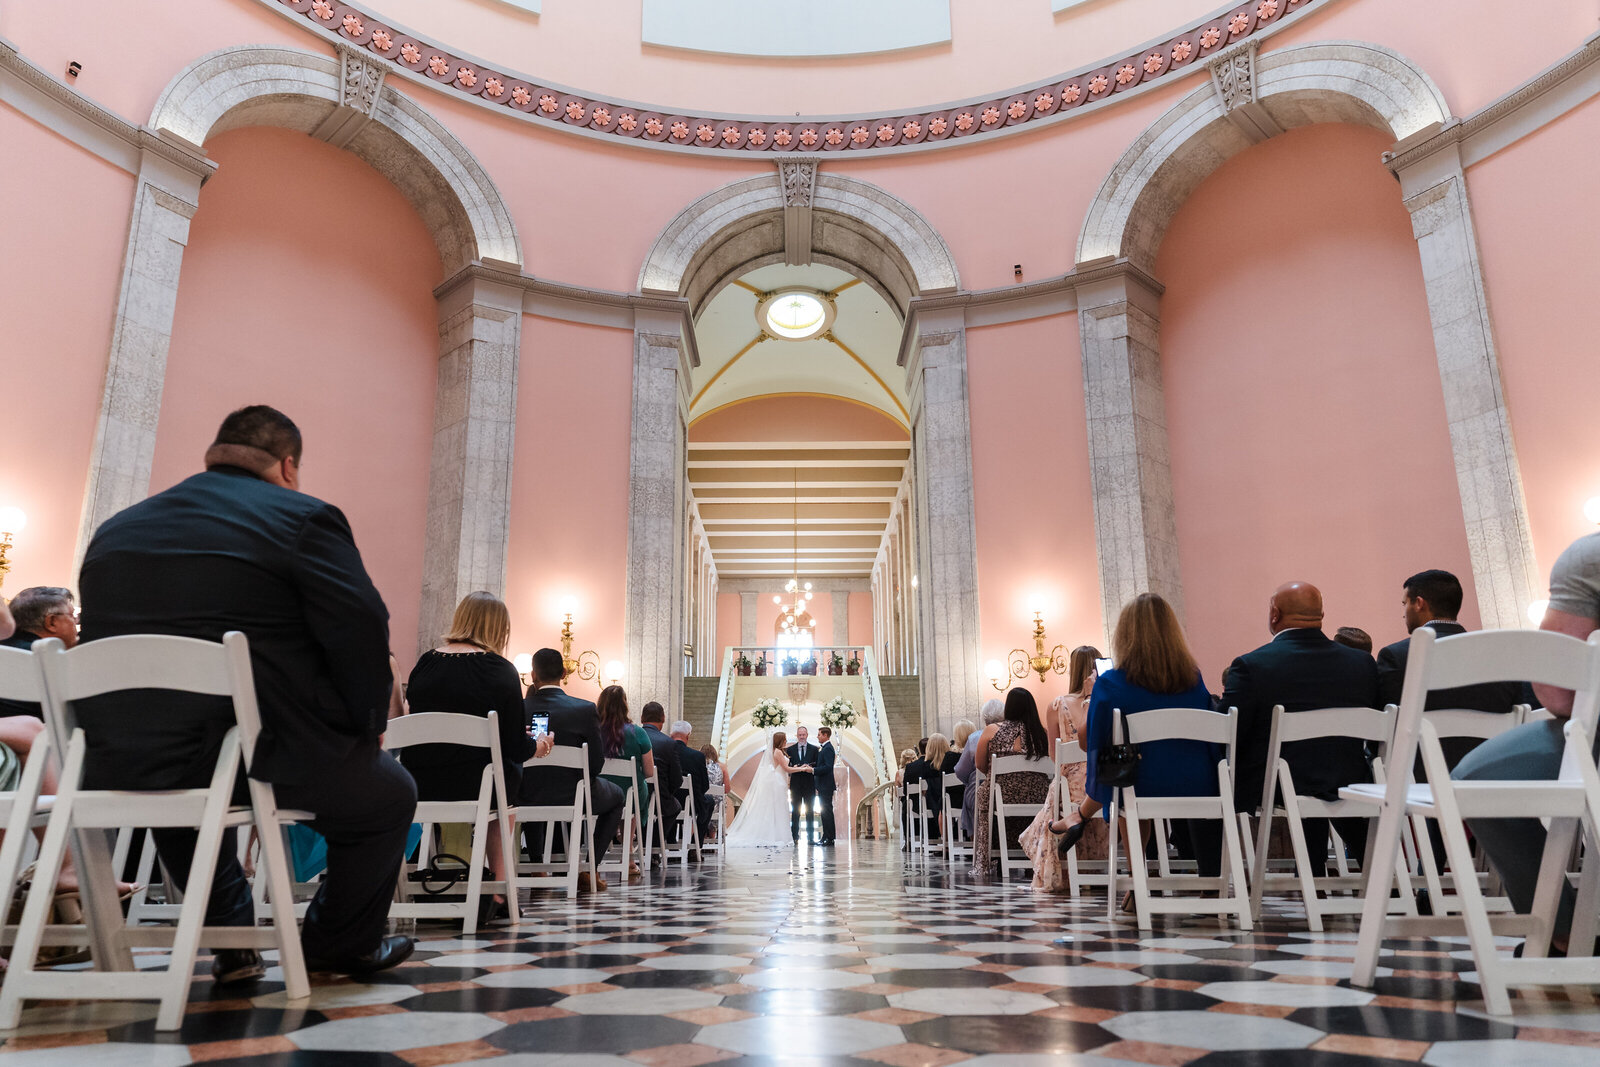 Wide angle photo of a wedding ceremony in the Rotunda of the Ohio Statehouse